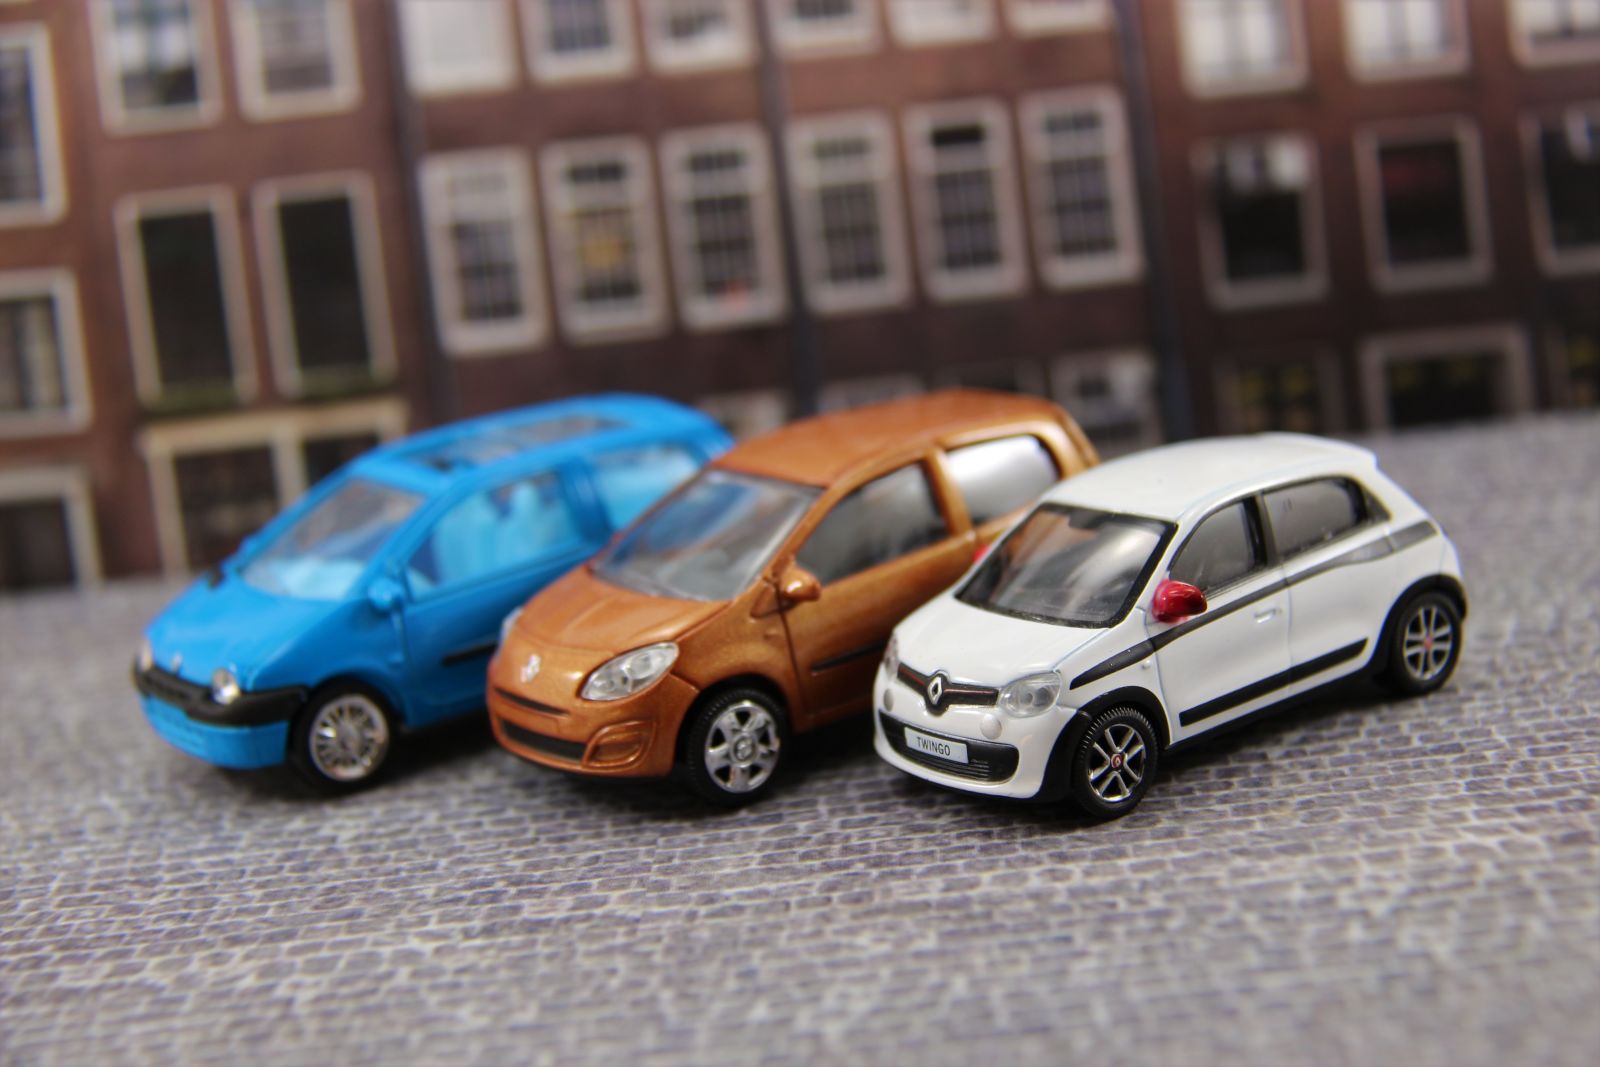  On the other hand, Norev has just begun pursuing true 1:64th scale and so the new Twingo from them is considerably smaller than Majorette’s as well as past Norevs.  